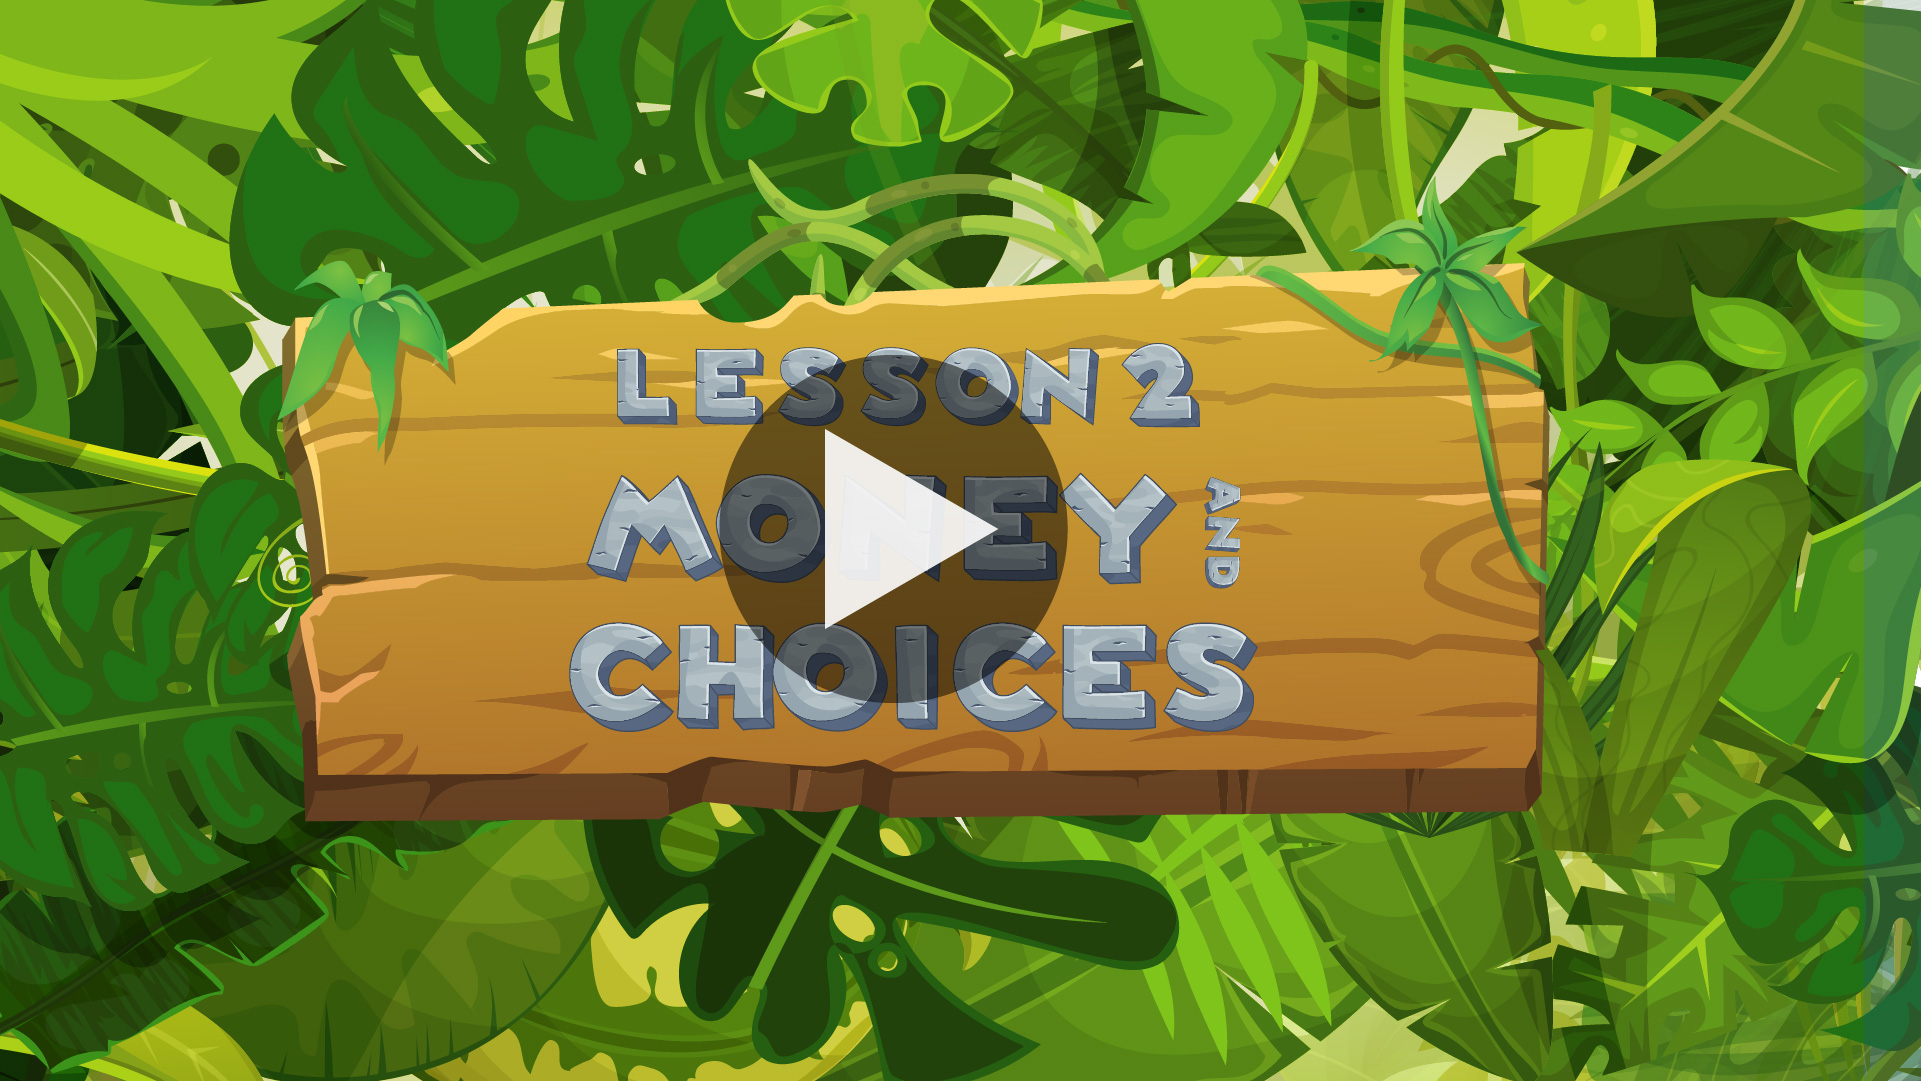 Financial Survival Camp Money and Choices video.